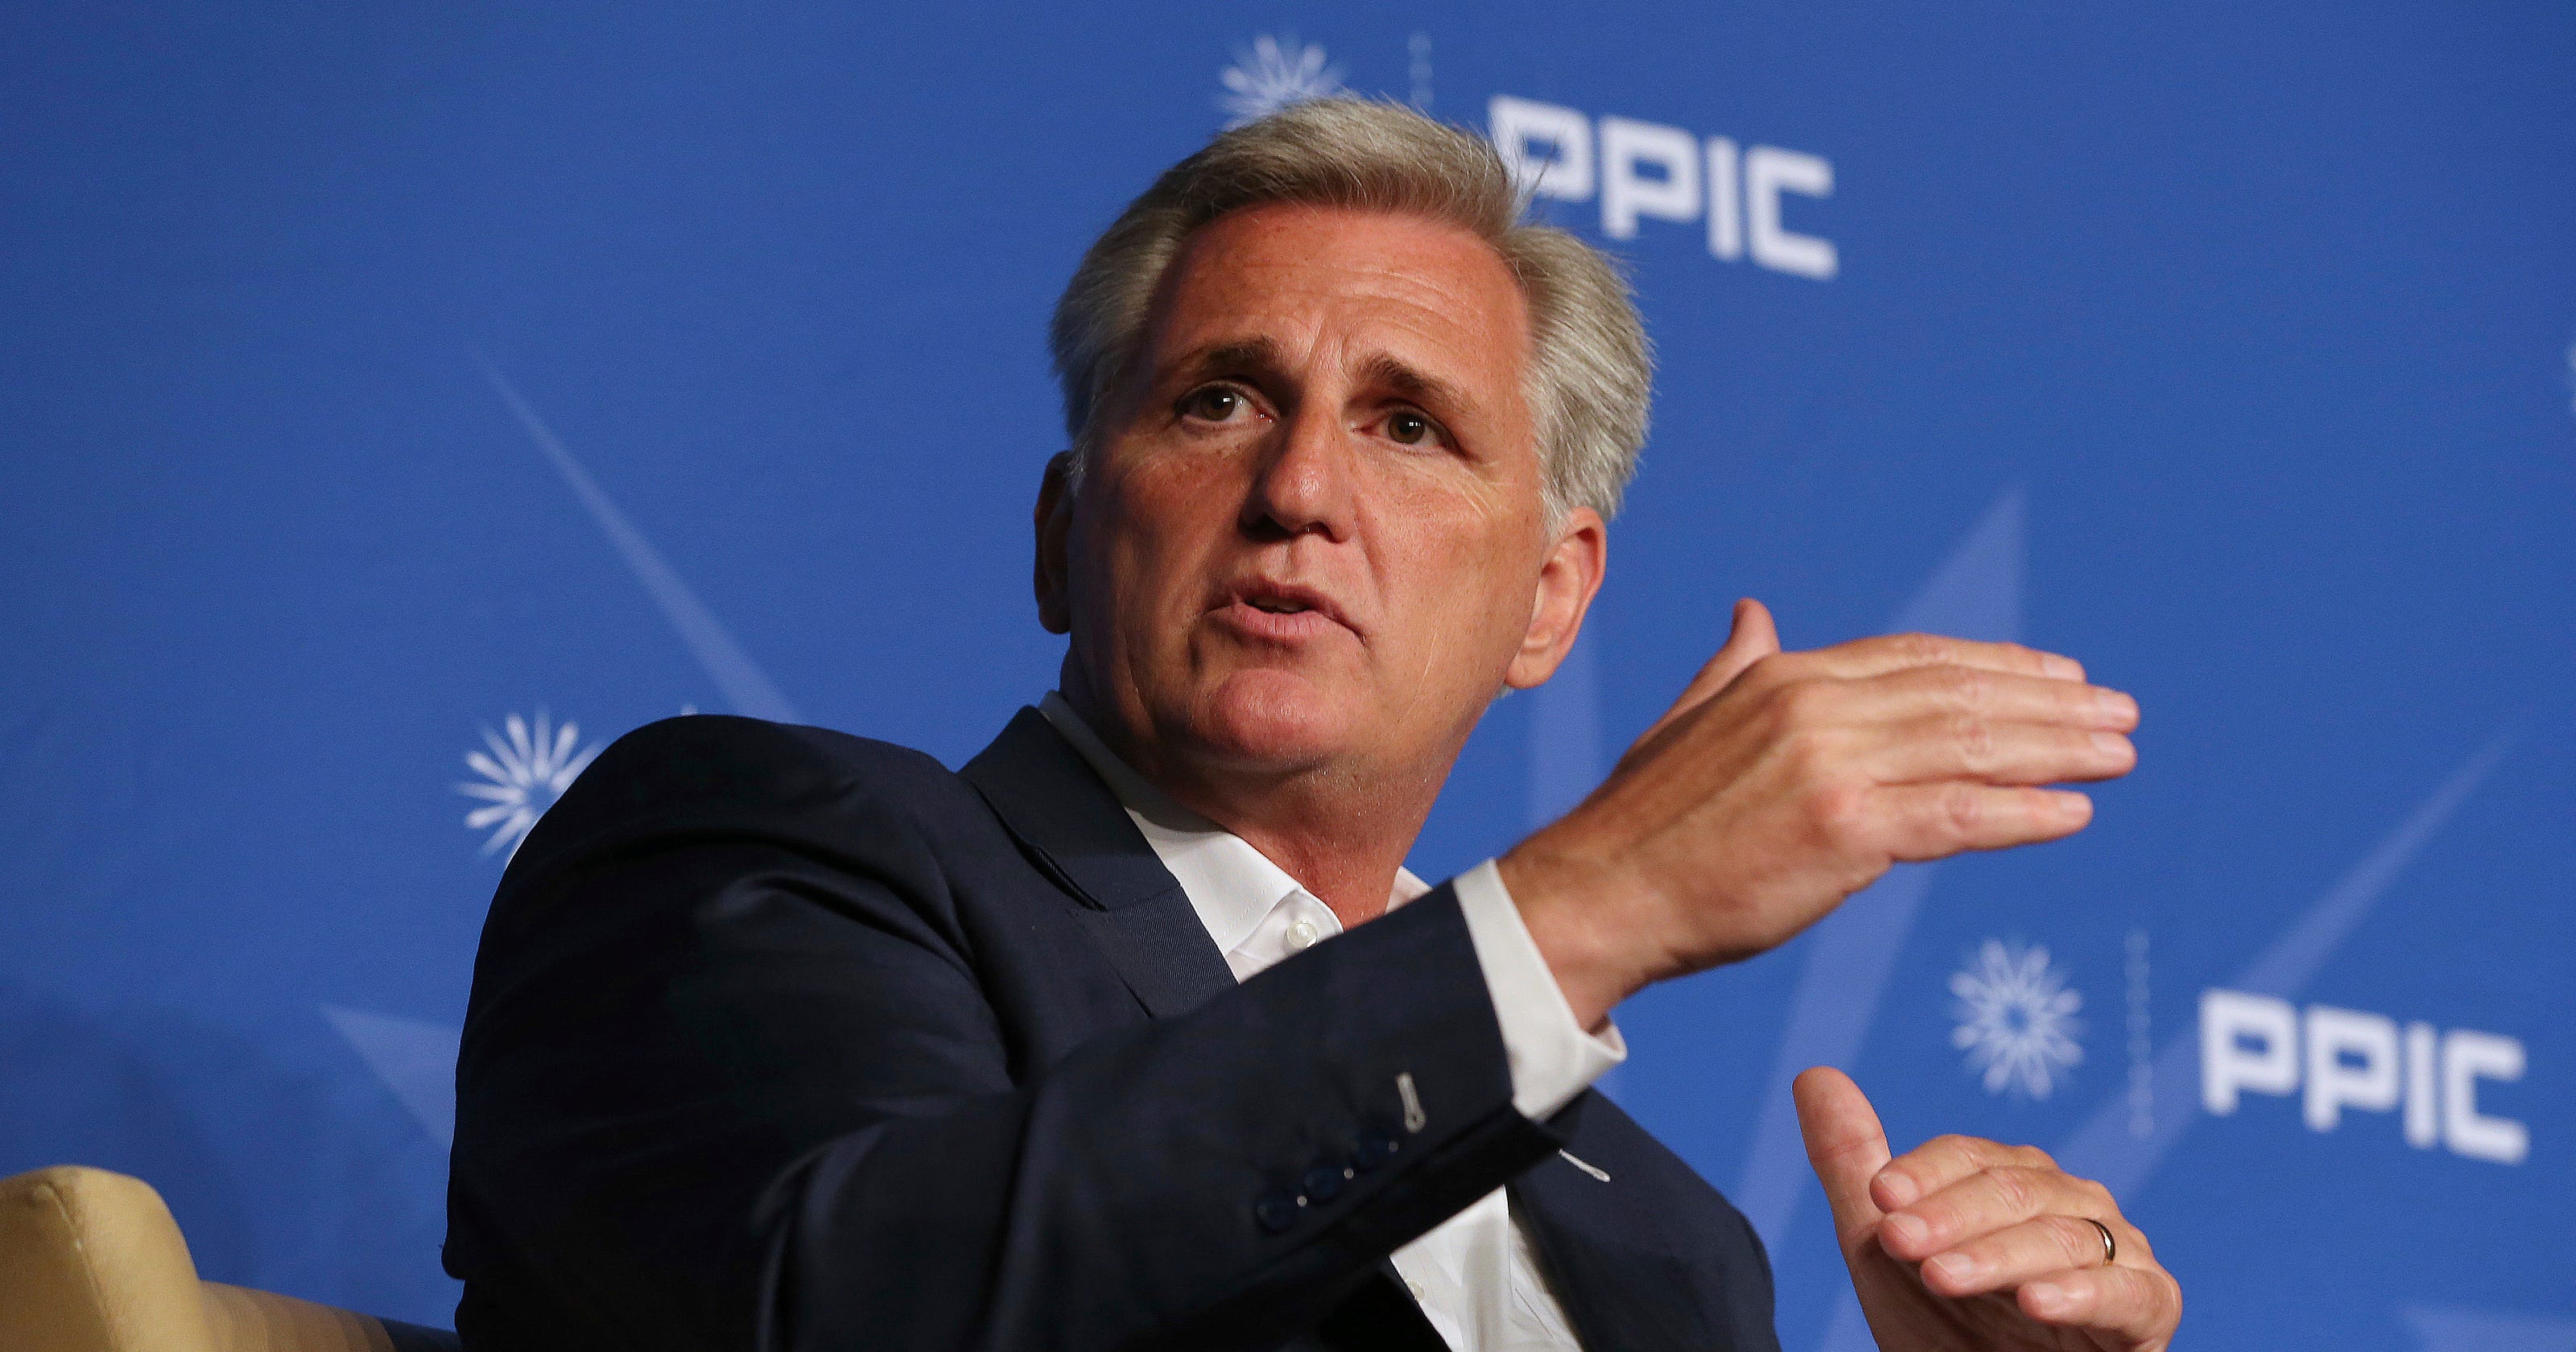 Kevin McCarthy elected minority leader for next Congress